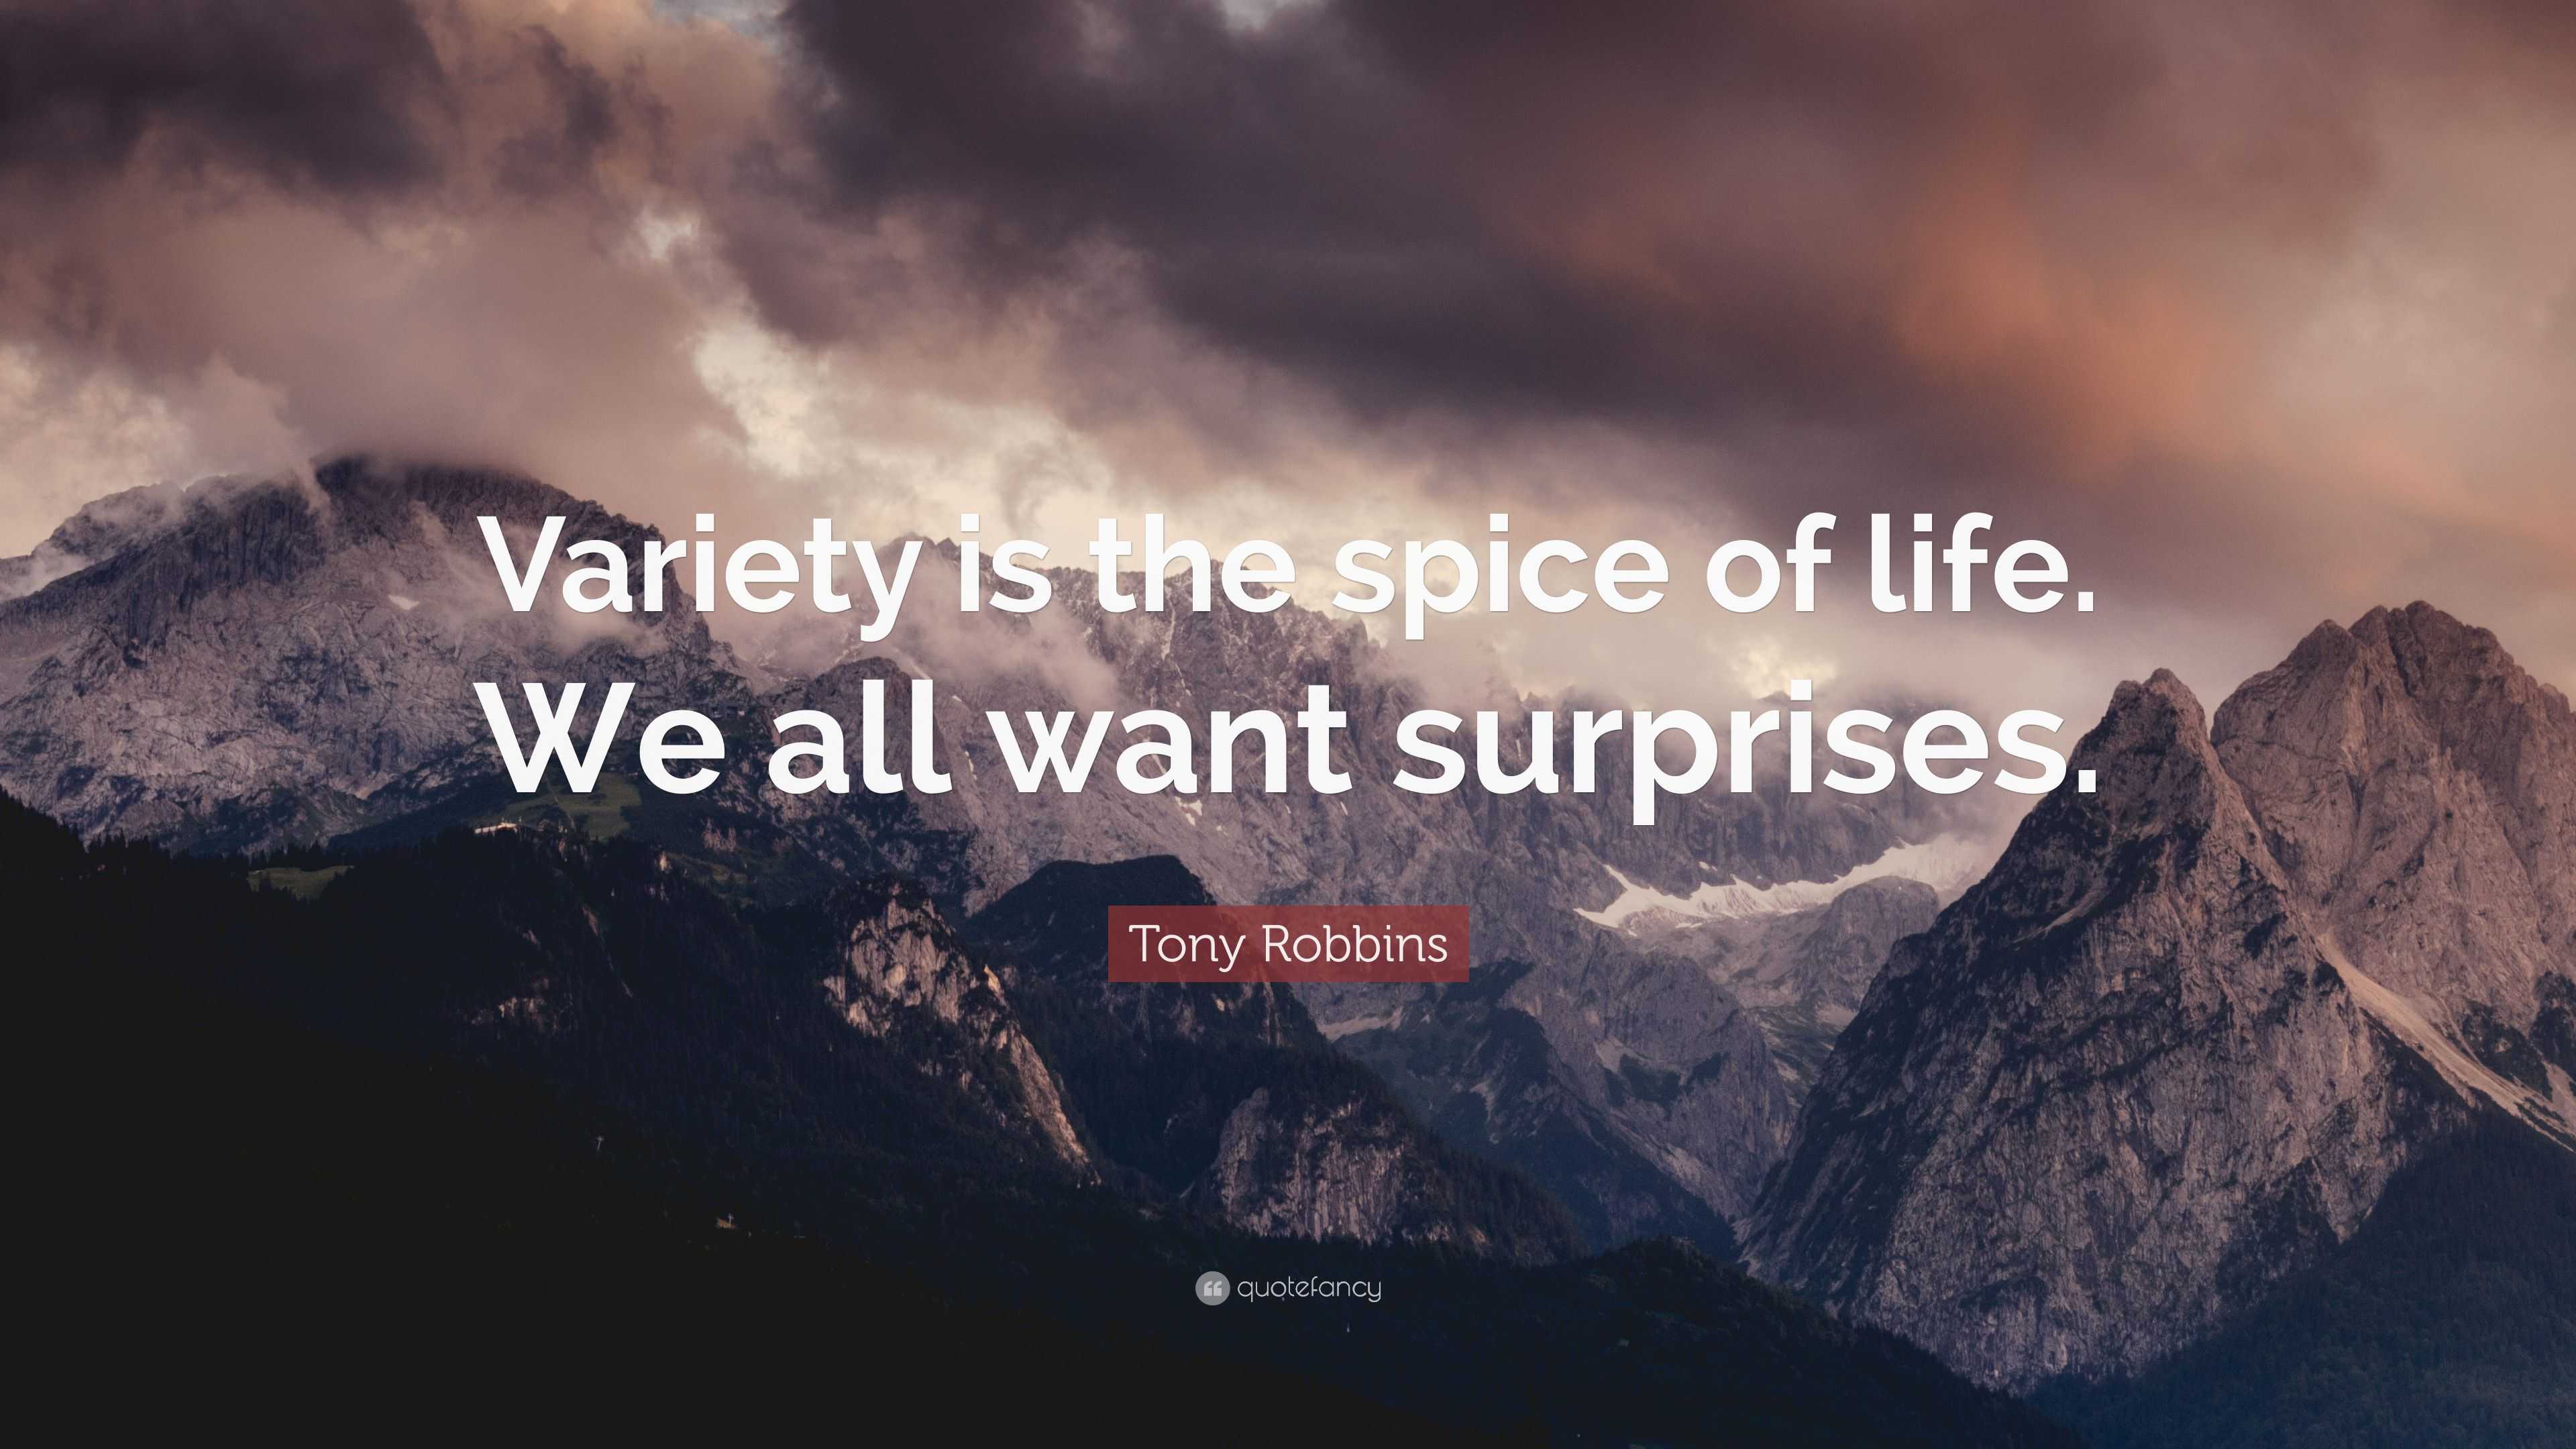 https://quotefancy.com/media/wallpaper/3840x2160/2131928-Tony-Robbins-Quote-Variety-is-the-spice-of-life-We-all-want.jpg